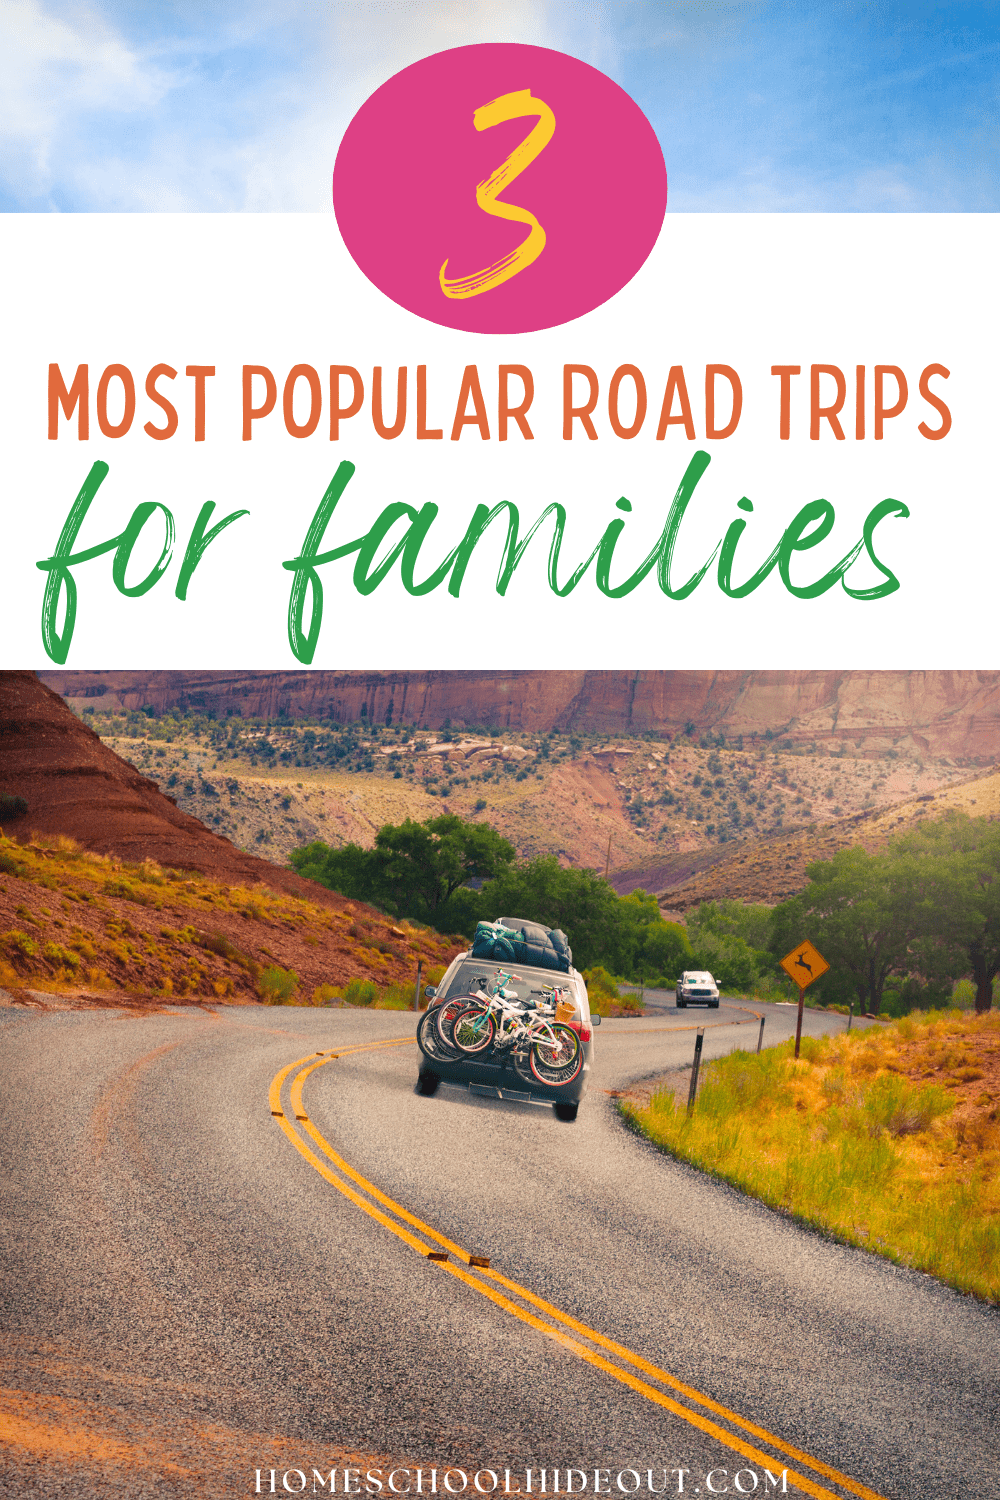 48 Best Road Trip Destinations with Kids - Family Road Trip Ideas